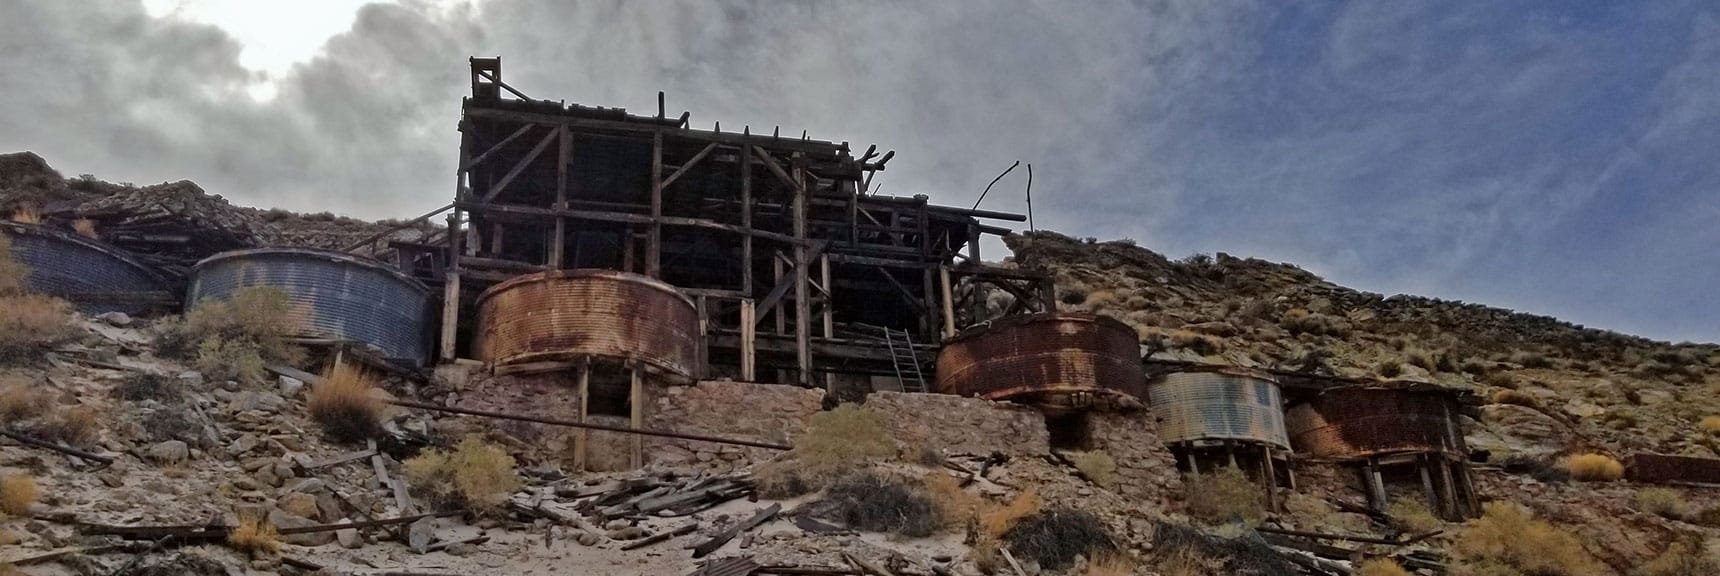 Skidoo Stamp Mill Viewed from Below | Skidoo Stamp Mill, Panamint Mountains, Death Valley National Park, CA